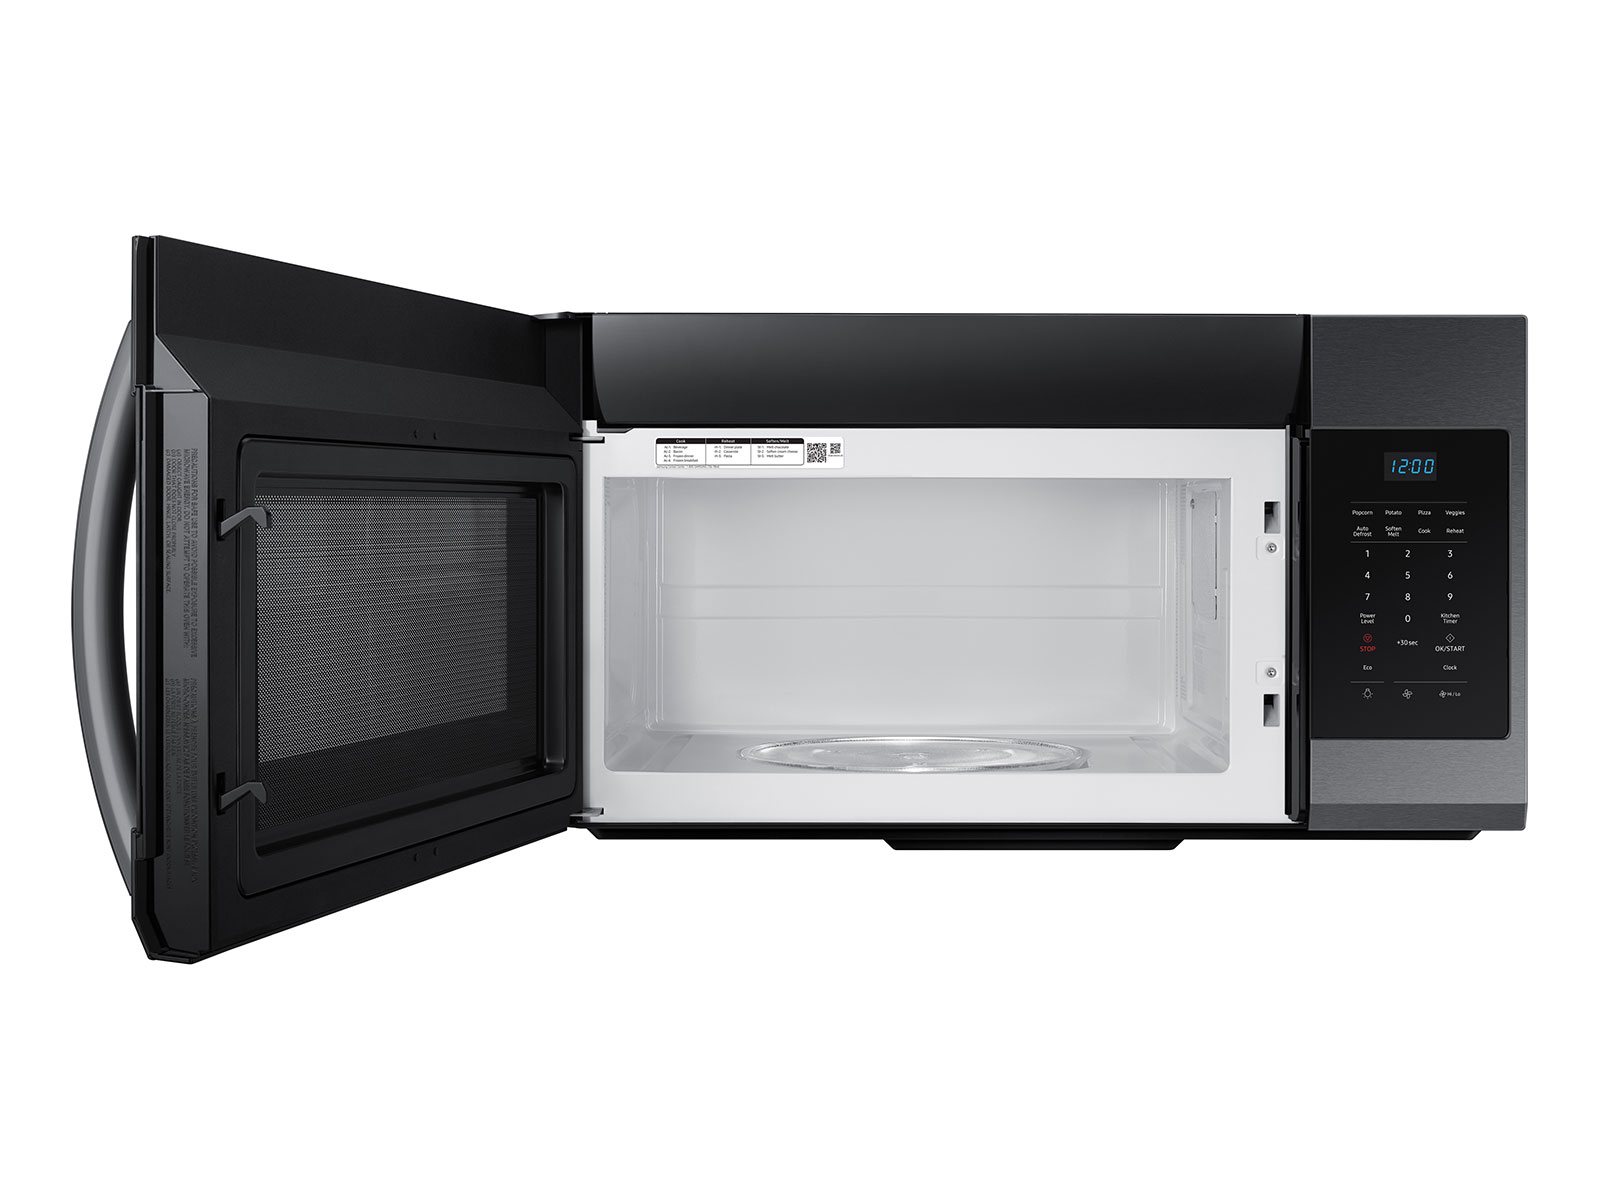 Samsung - 1.7 Cu. ft. Over-the-range Microwave - Black Stainless Steel